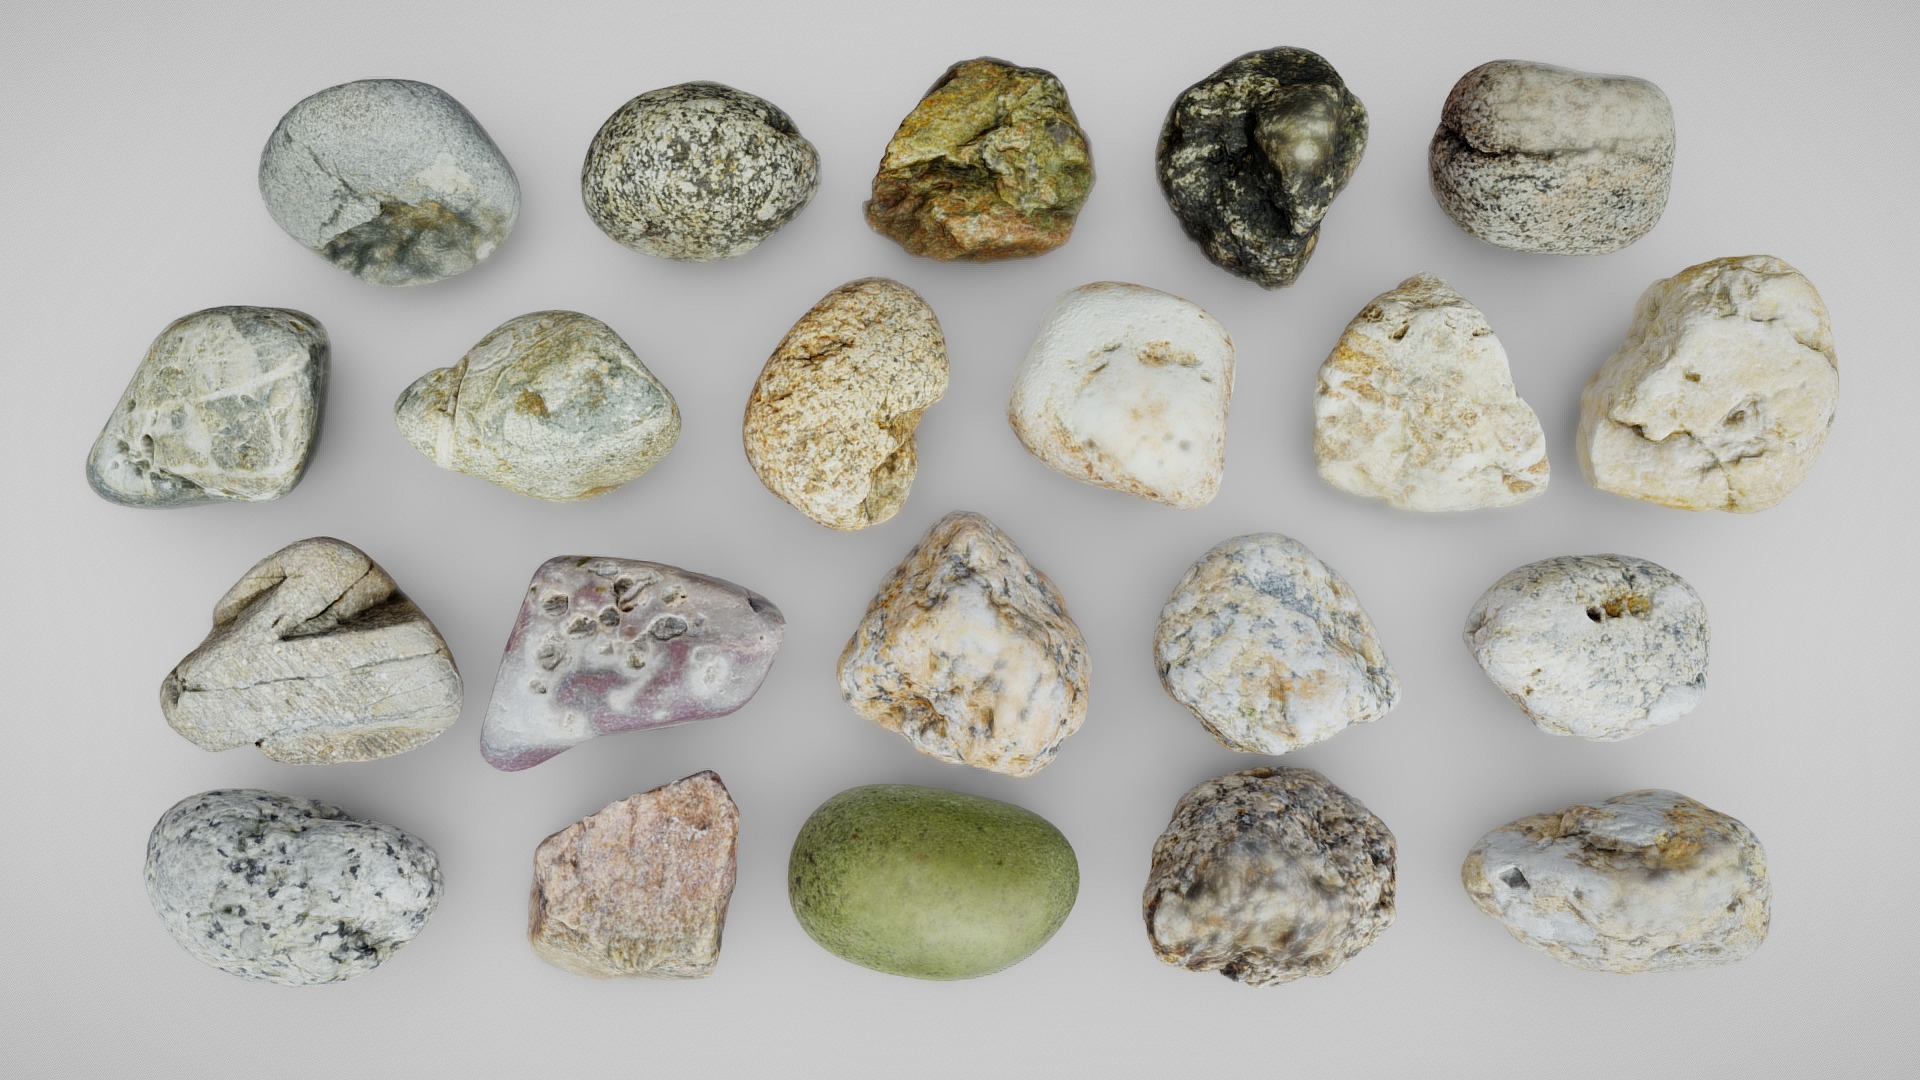 Other packs: pack 2, pack 3, pack 4

These assets were generated from scans of beach pebbles and stones I picked up on the shore between Plouguerneau and Roscoff, in France. I did not specifically select extraordinary samples, but rather tried to go for a broad diversity of colors and shapes in order to create an interesting pack.

Each prop in this bundle comes with .fbx, .obj and .dae formats, and is available in 5 different resolutions:




LOD0: 15k tris - 4096x4096 textures (albedo and normal maps)

LOD1: 5k tris - 2048x2048 (those are the ones visible here!)

LOD2: 1.5k tris - 1024x1024

LOD3: 500 tris - 512x512

LOD4: 150 tris - 256x256

If this fits your usage, you can also simply download the full collection of 84 rocks for free in the lowest resolution here :D

Enjoy ! - Rocks - Pack 1 - Buy Royalty Free 3D model by Loïc Norgeot (@norgeotloic) 3d model